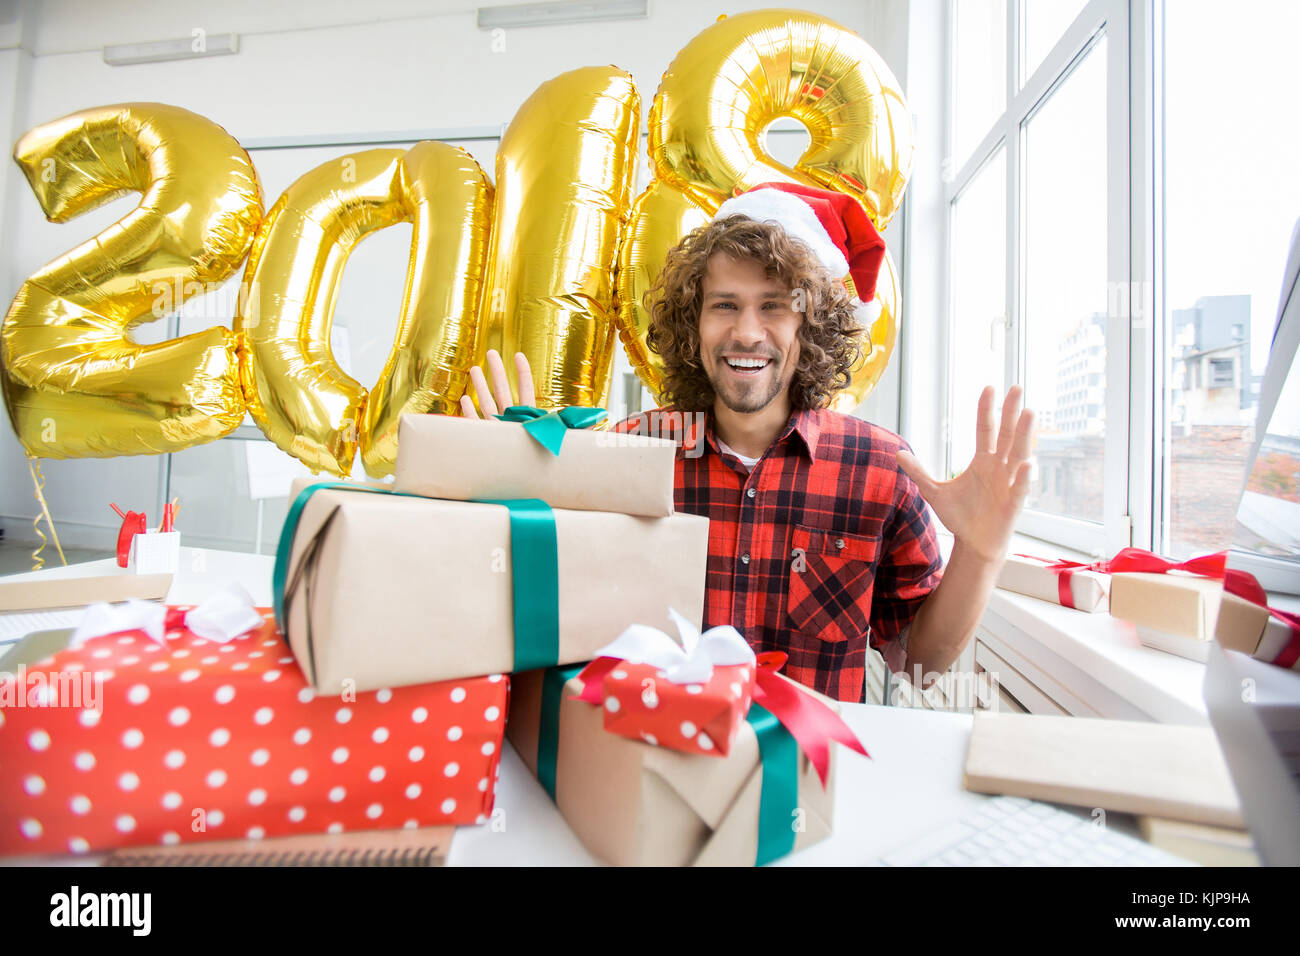 Laughing man in xmas hat expressing gladness of holidays and looking at camera Stock Photo